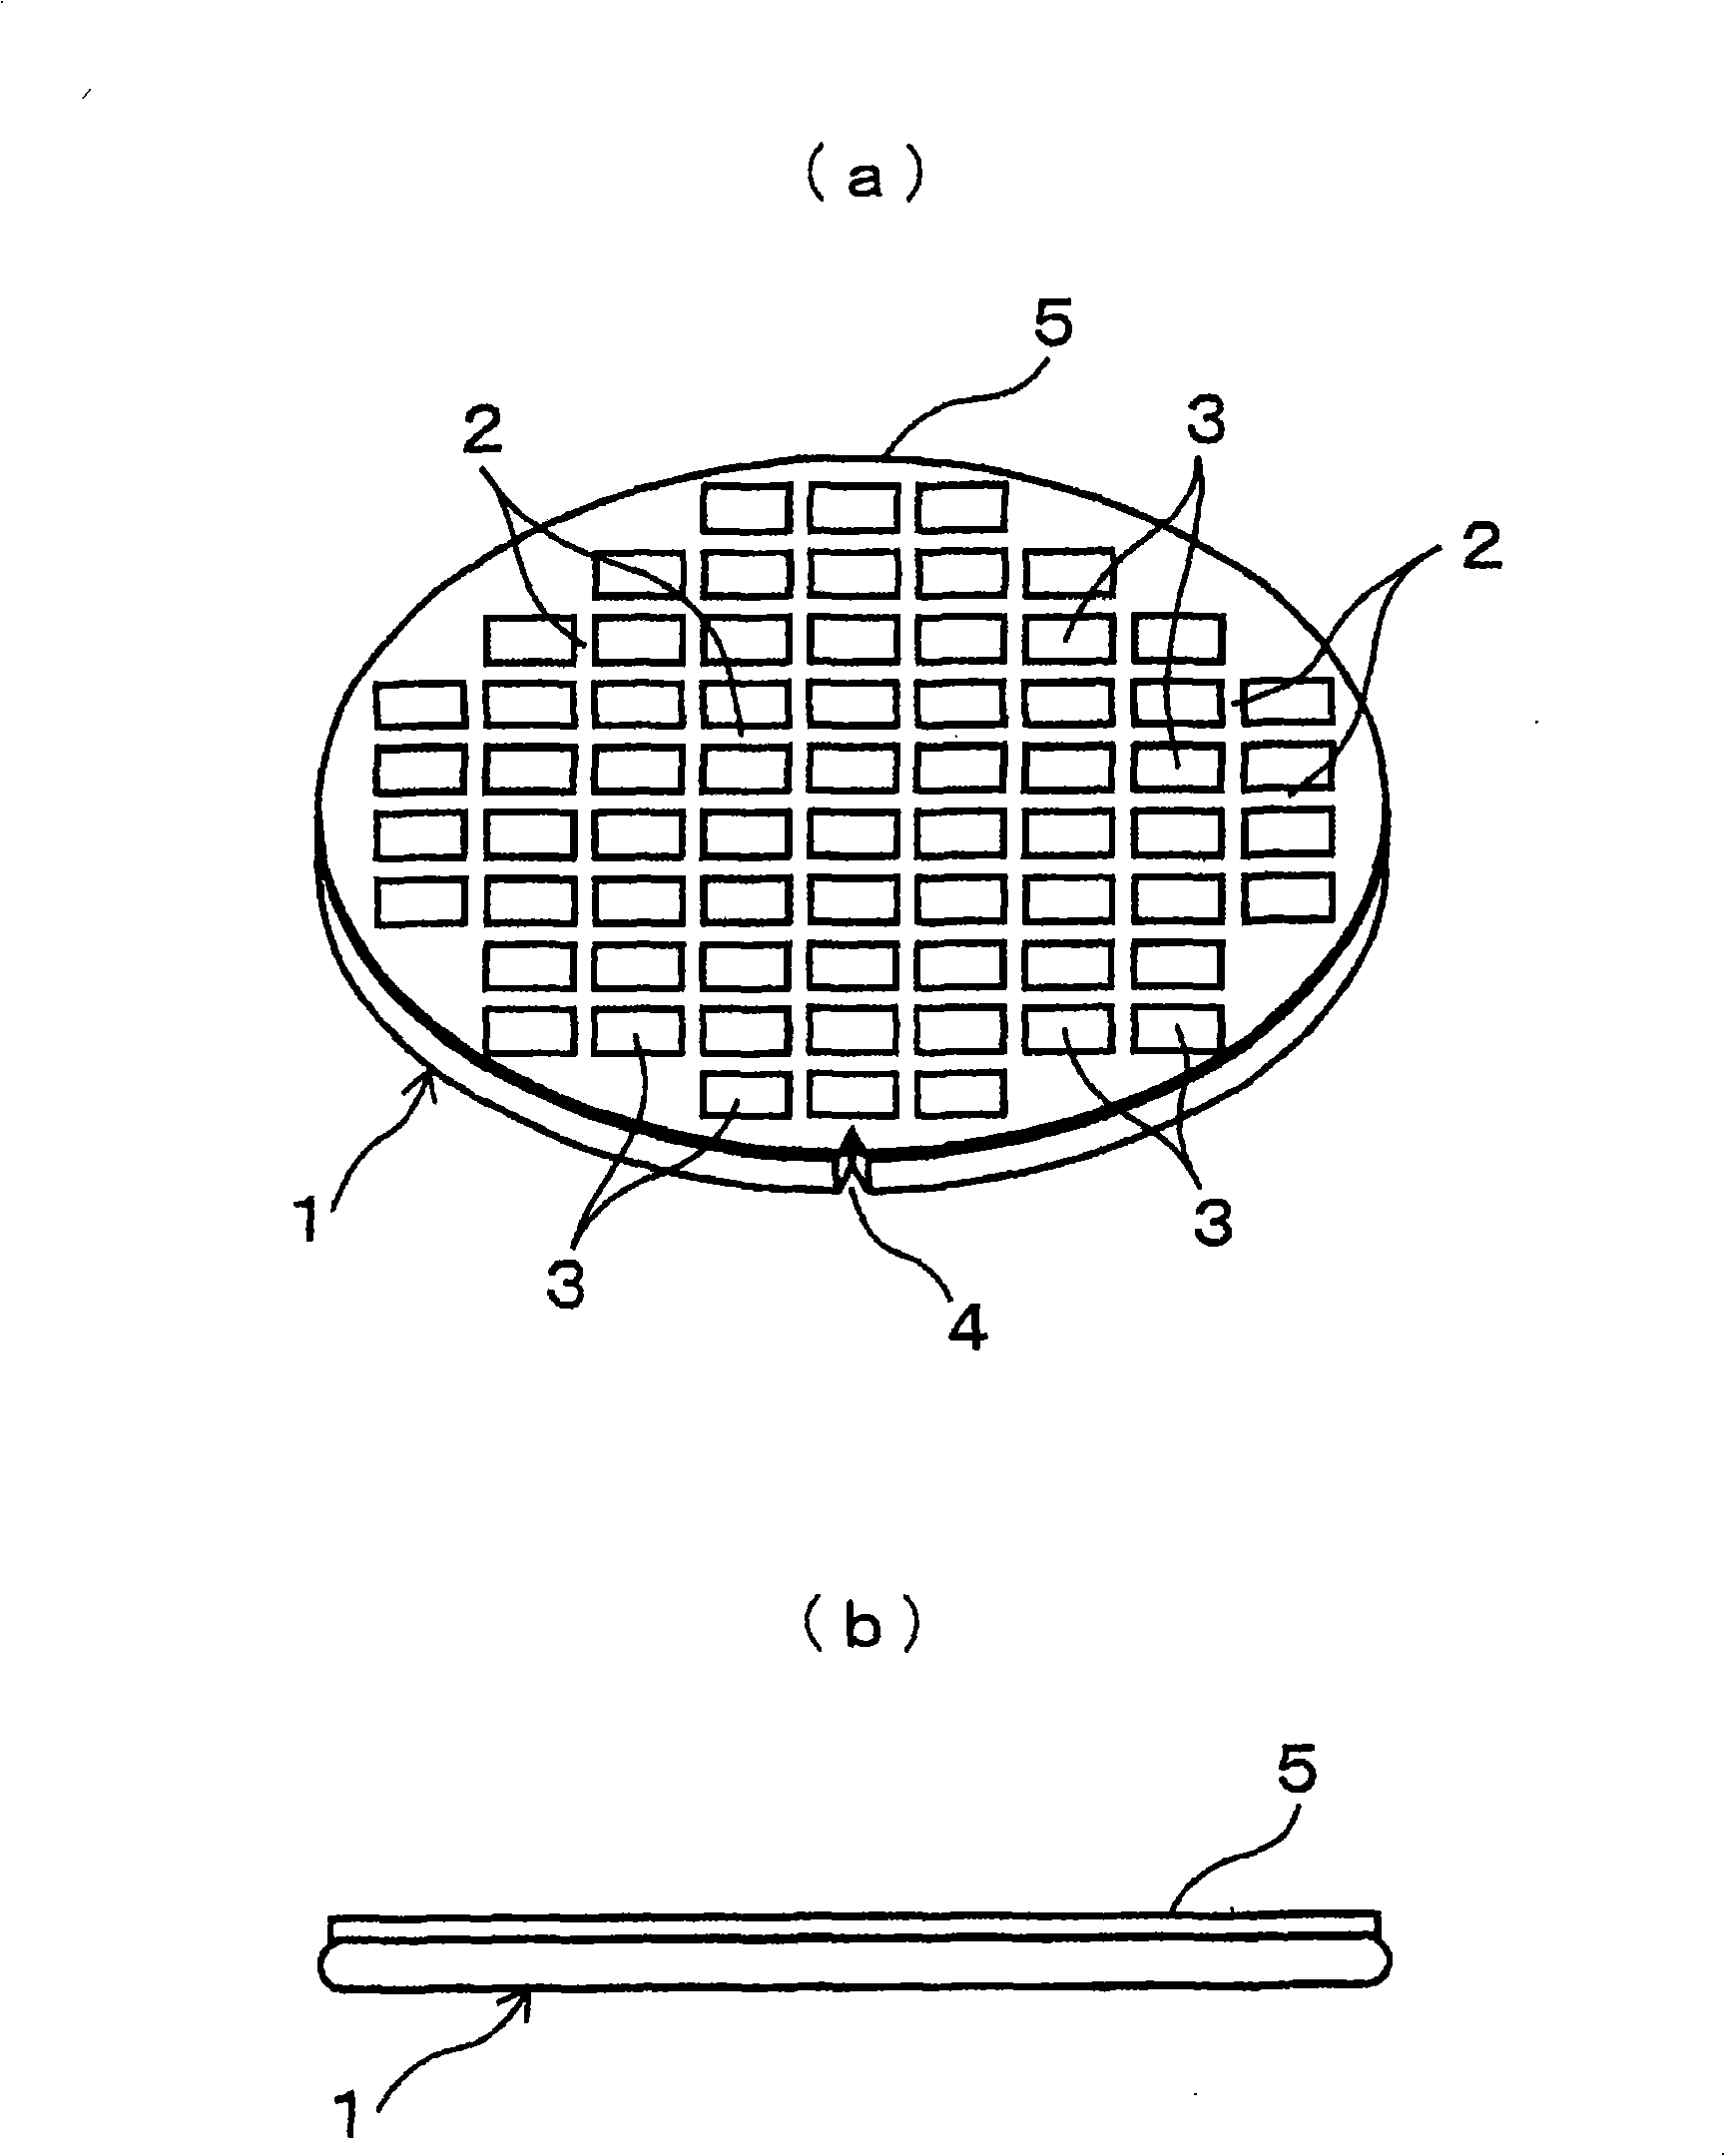 Milling processing device for wafer